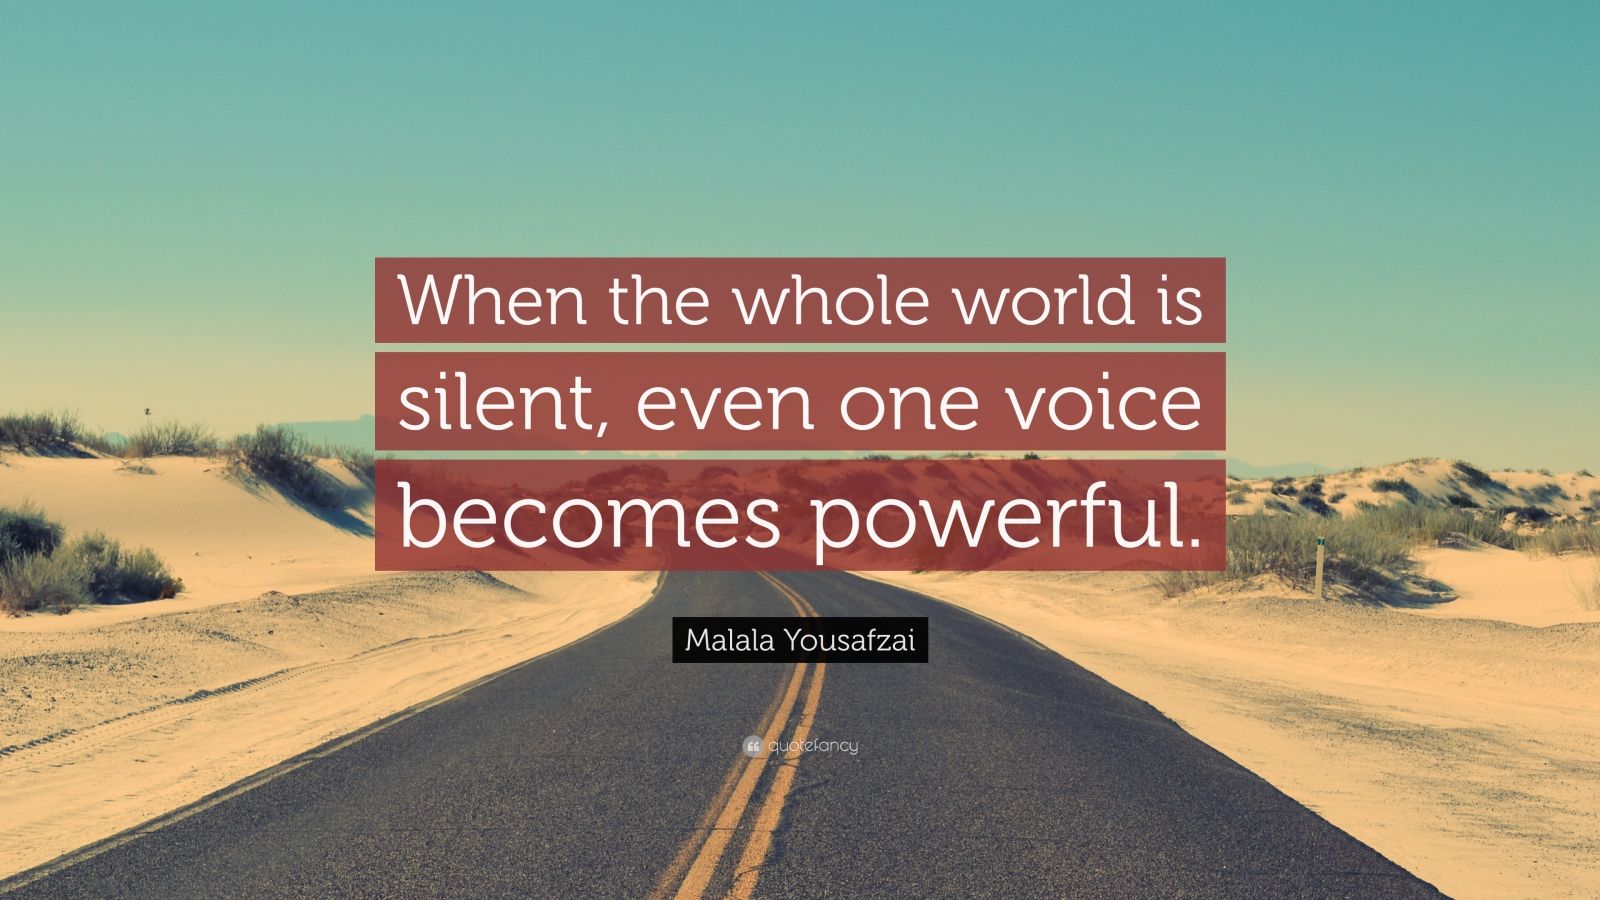 Malala Yousafzai Quote: "When the whole world is silent ...